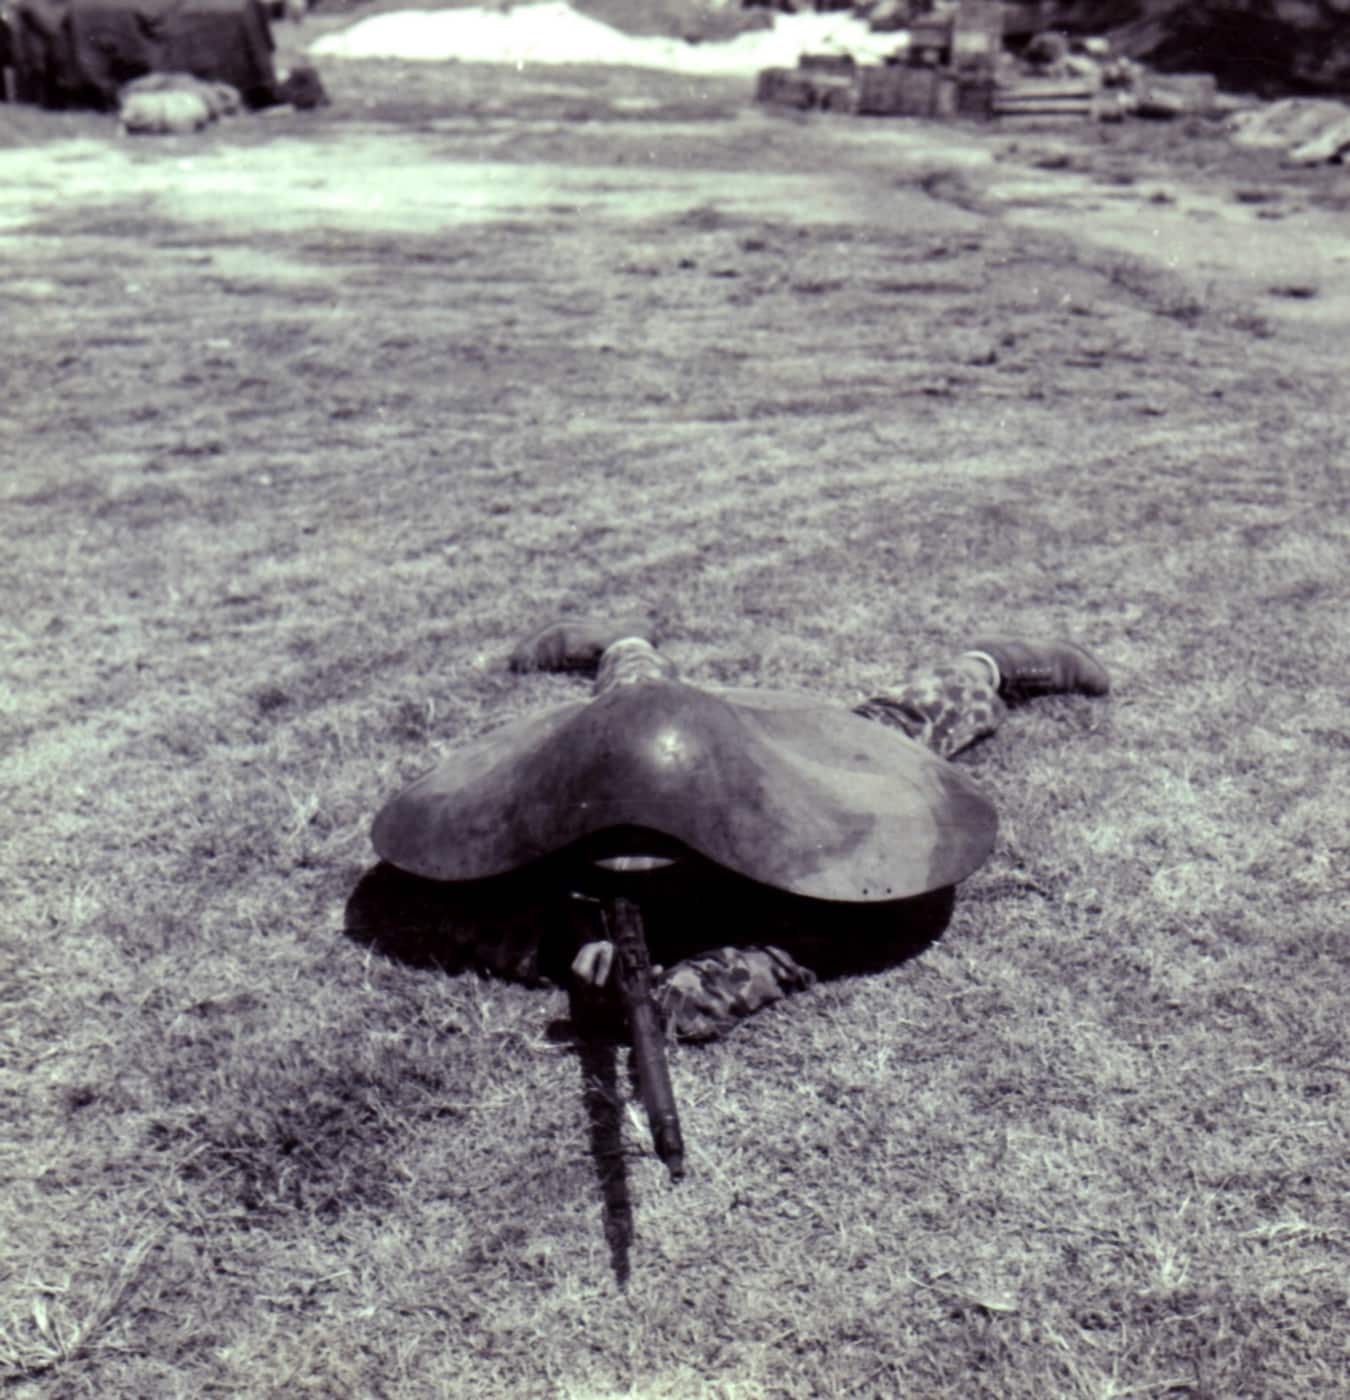 In this photograph we see a Marine testing the captured Japanese armor.